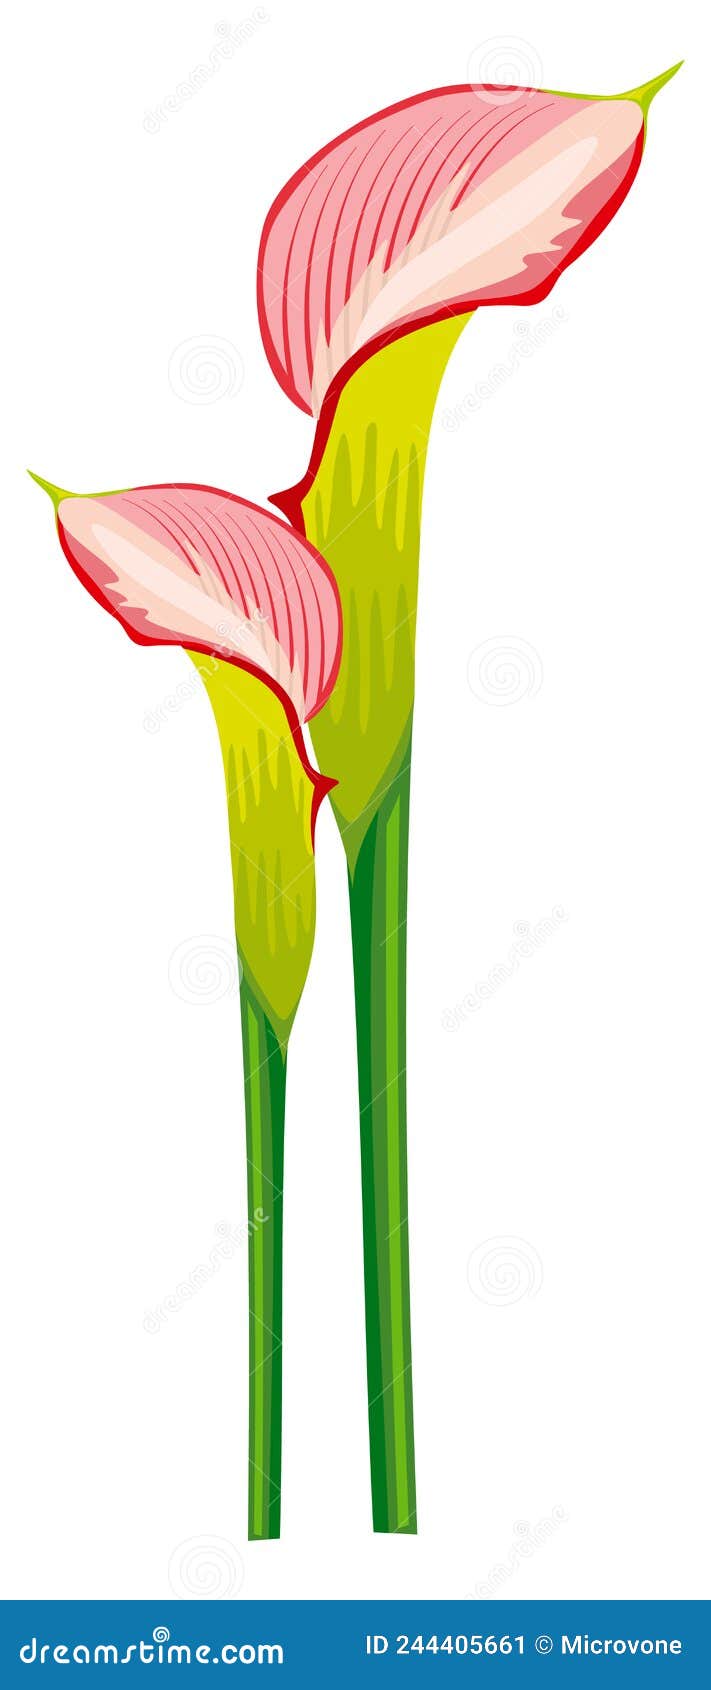 Realistic Lily Drawing, Realistic Lily Flower Sketch, Outline Realistic ...